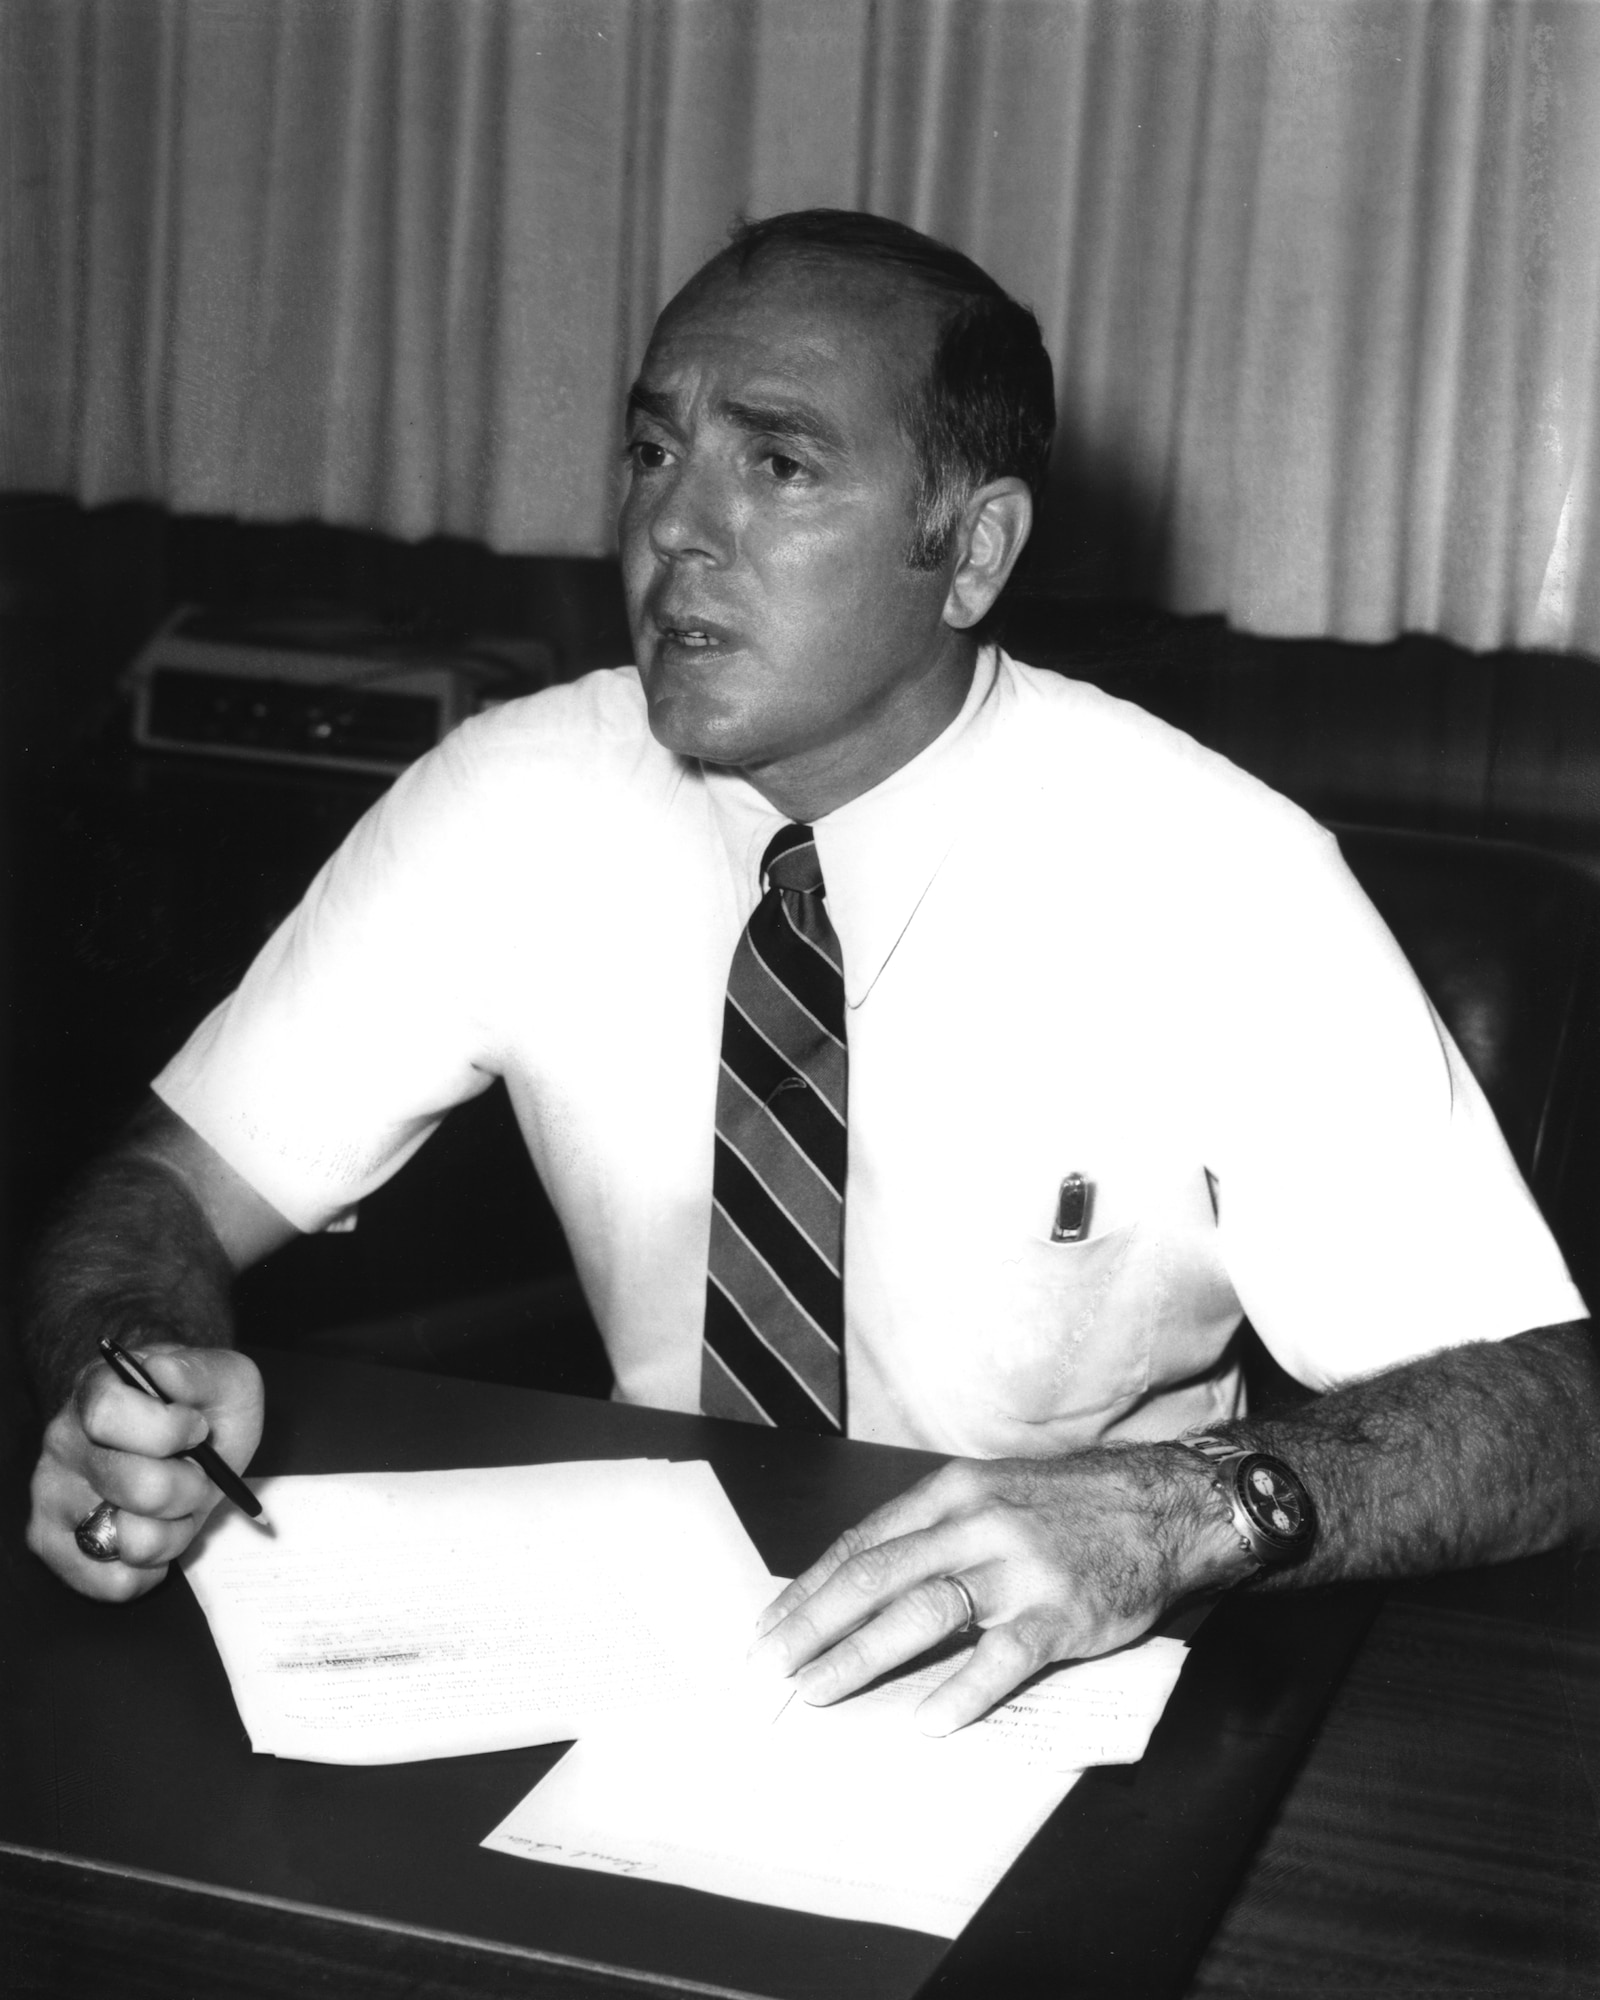 George P. Peterson served as Director of the Air Force Research Laboratory’s Materials and Manufacturing Directorate from 1974-1977 and then again from 1980-1985 and was instrumental in the development of advanced composite materials used across the world today. (U.S. Air Force Photo)